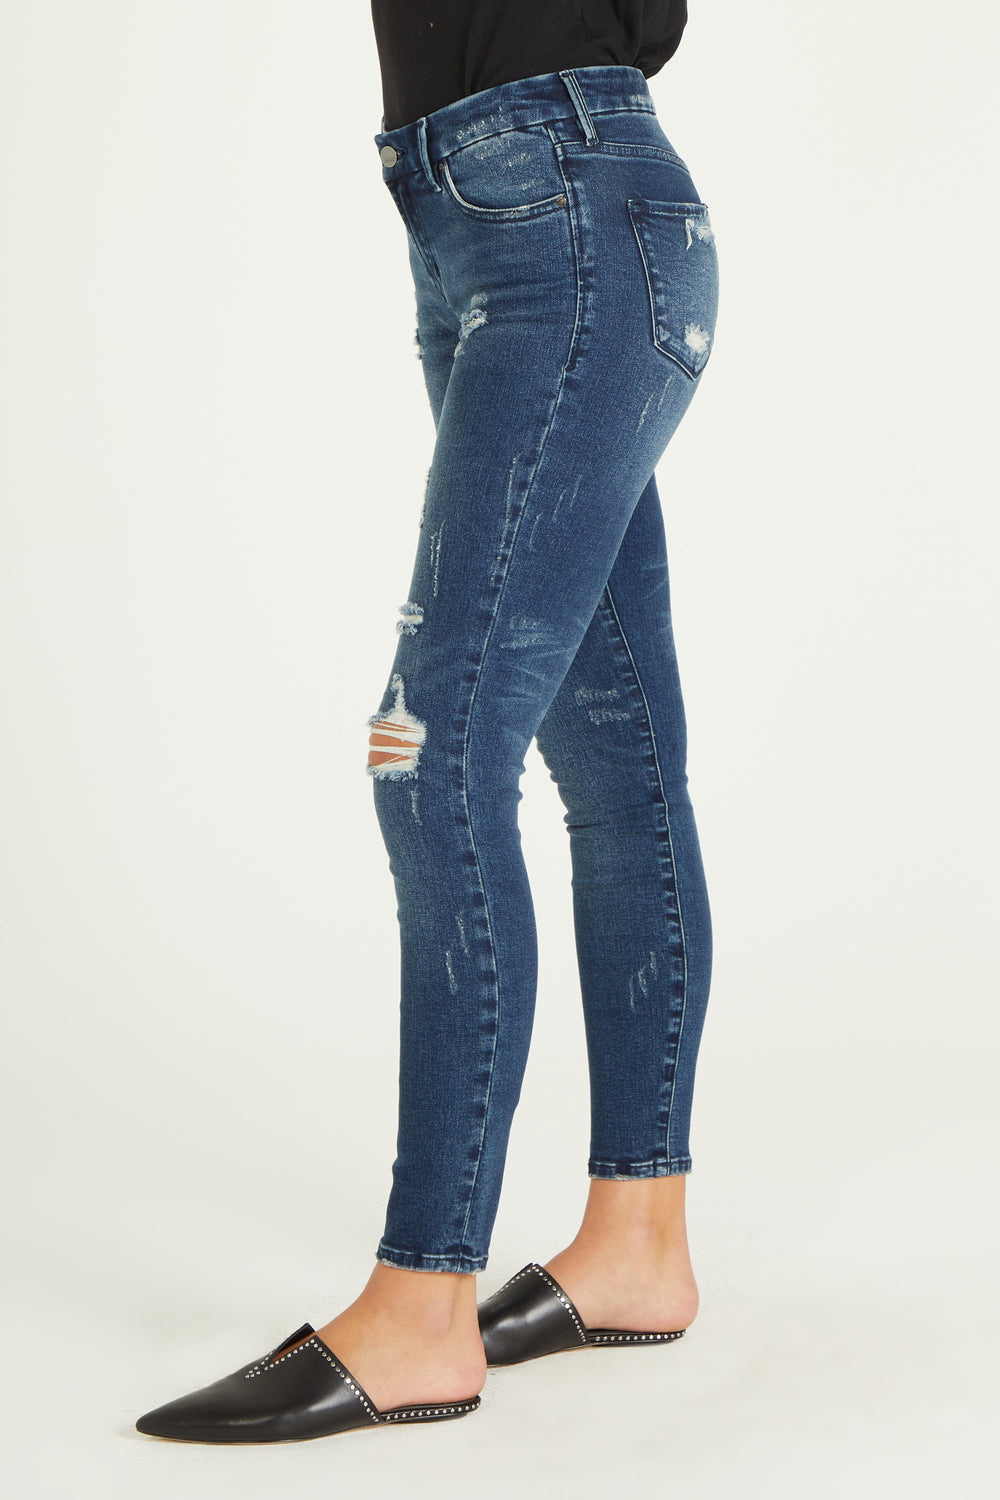 image of a female model wearing a 9 1/2" GISELE HIGH RISE SKINNY JEANS IN ALABAMA JEANS